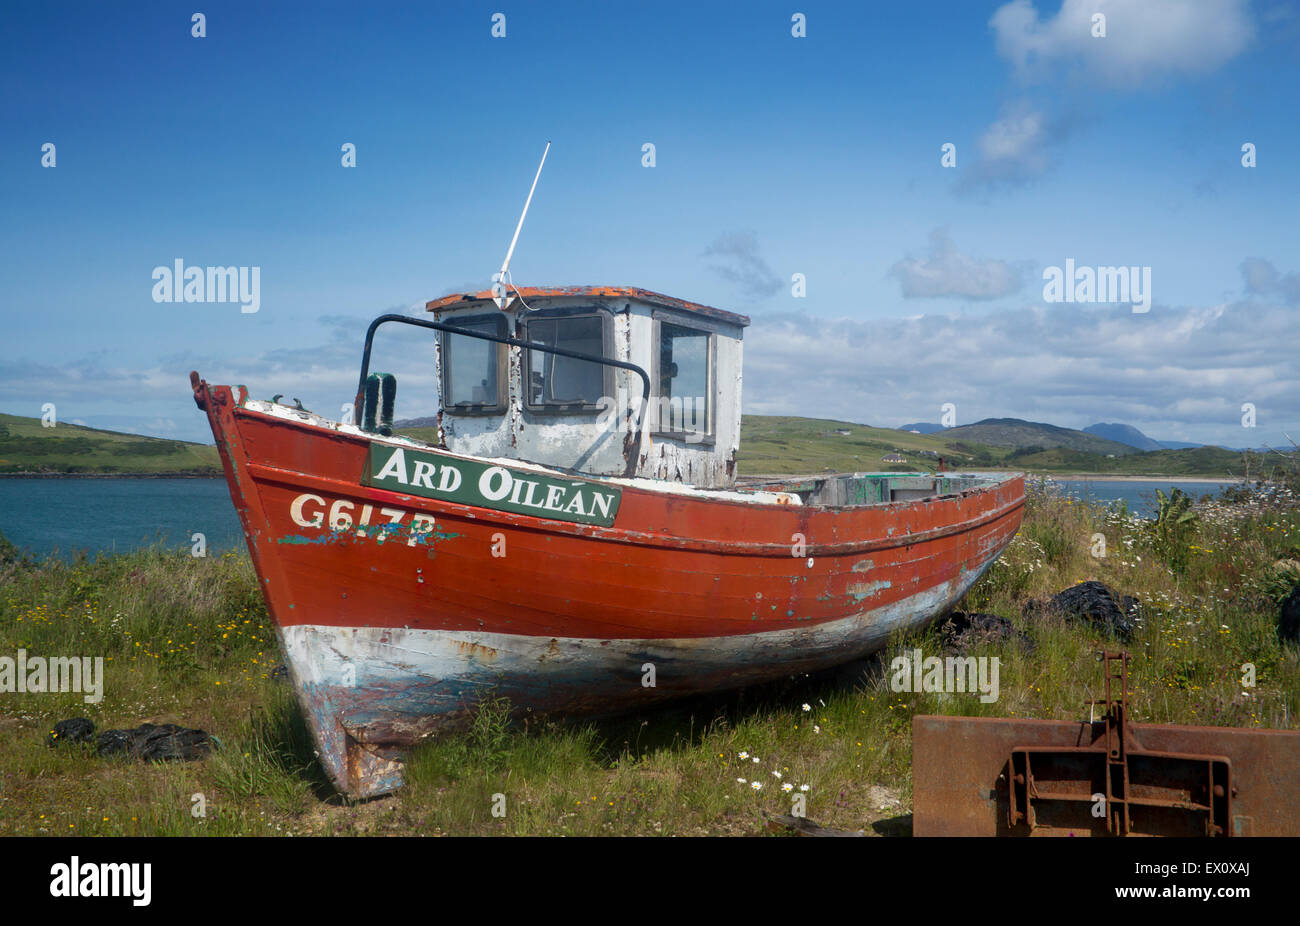 Old red fishing boat on shore with Twelve Bens mountains in background Cleggan Connemara County Galway Eire Republic of Ireland Stock Photo